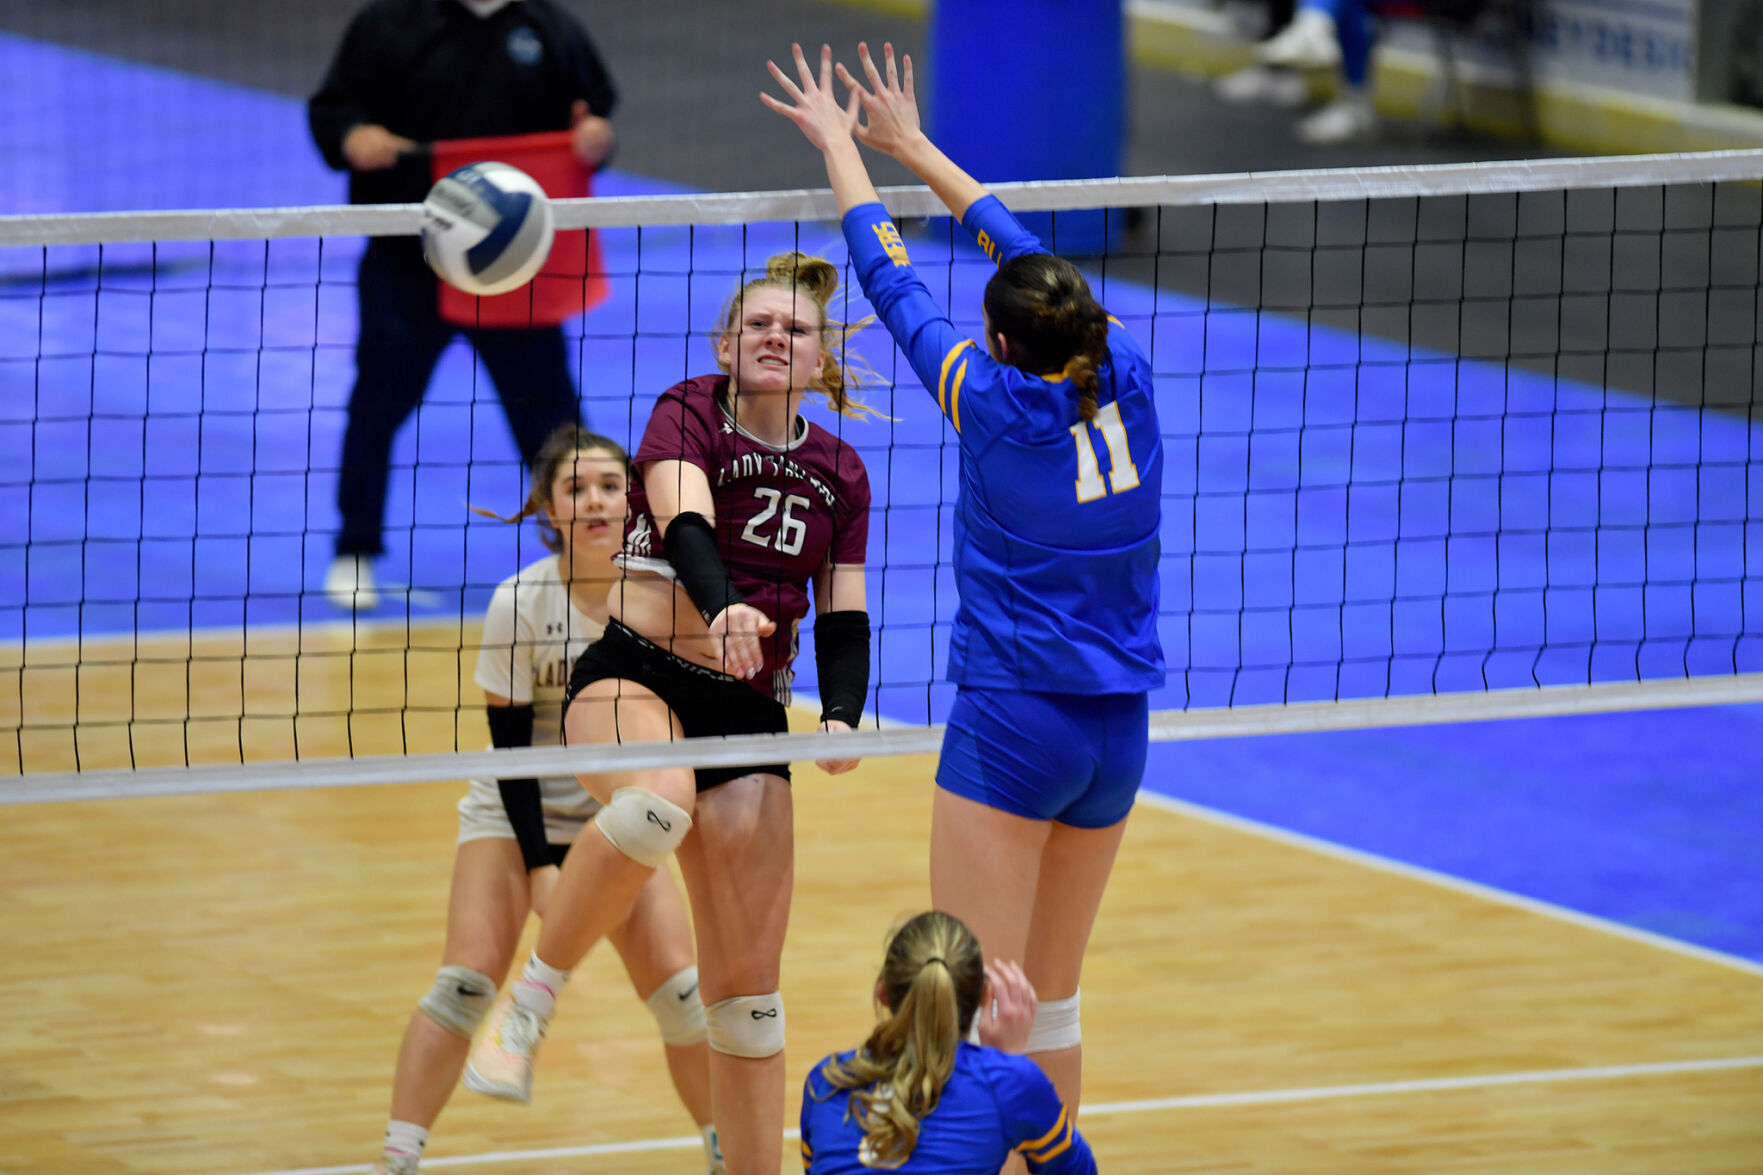 Portville Girls Volleyball Team Sweeps Trumansburg to Advance to Class C State Finals